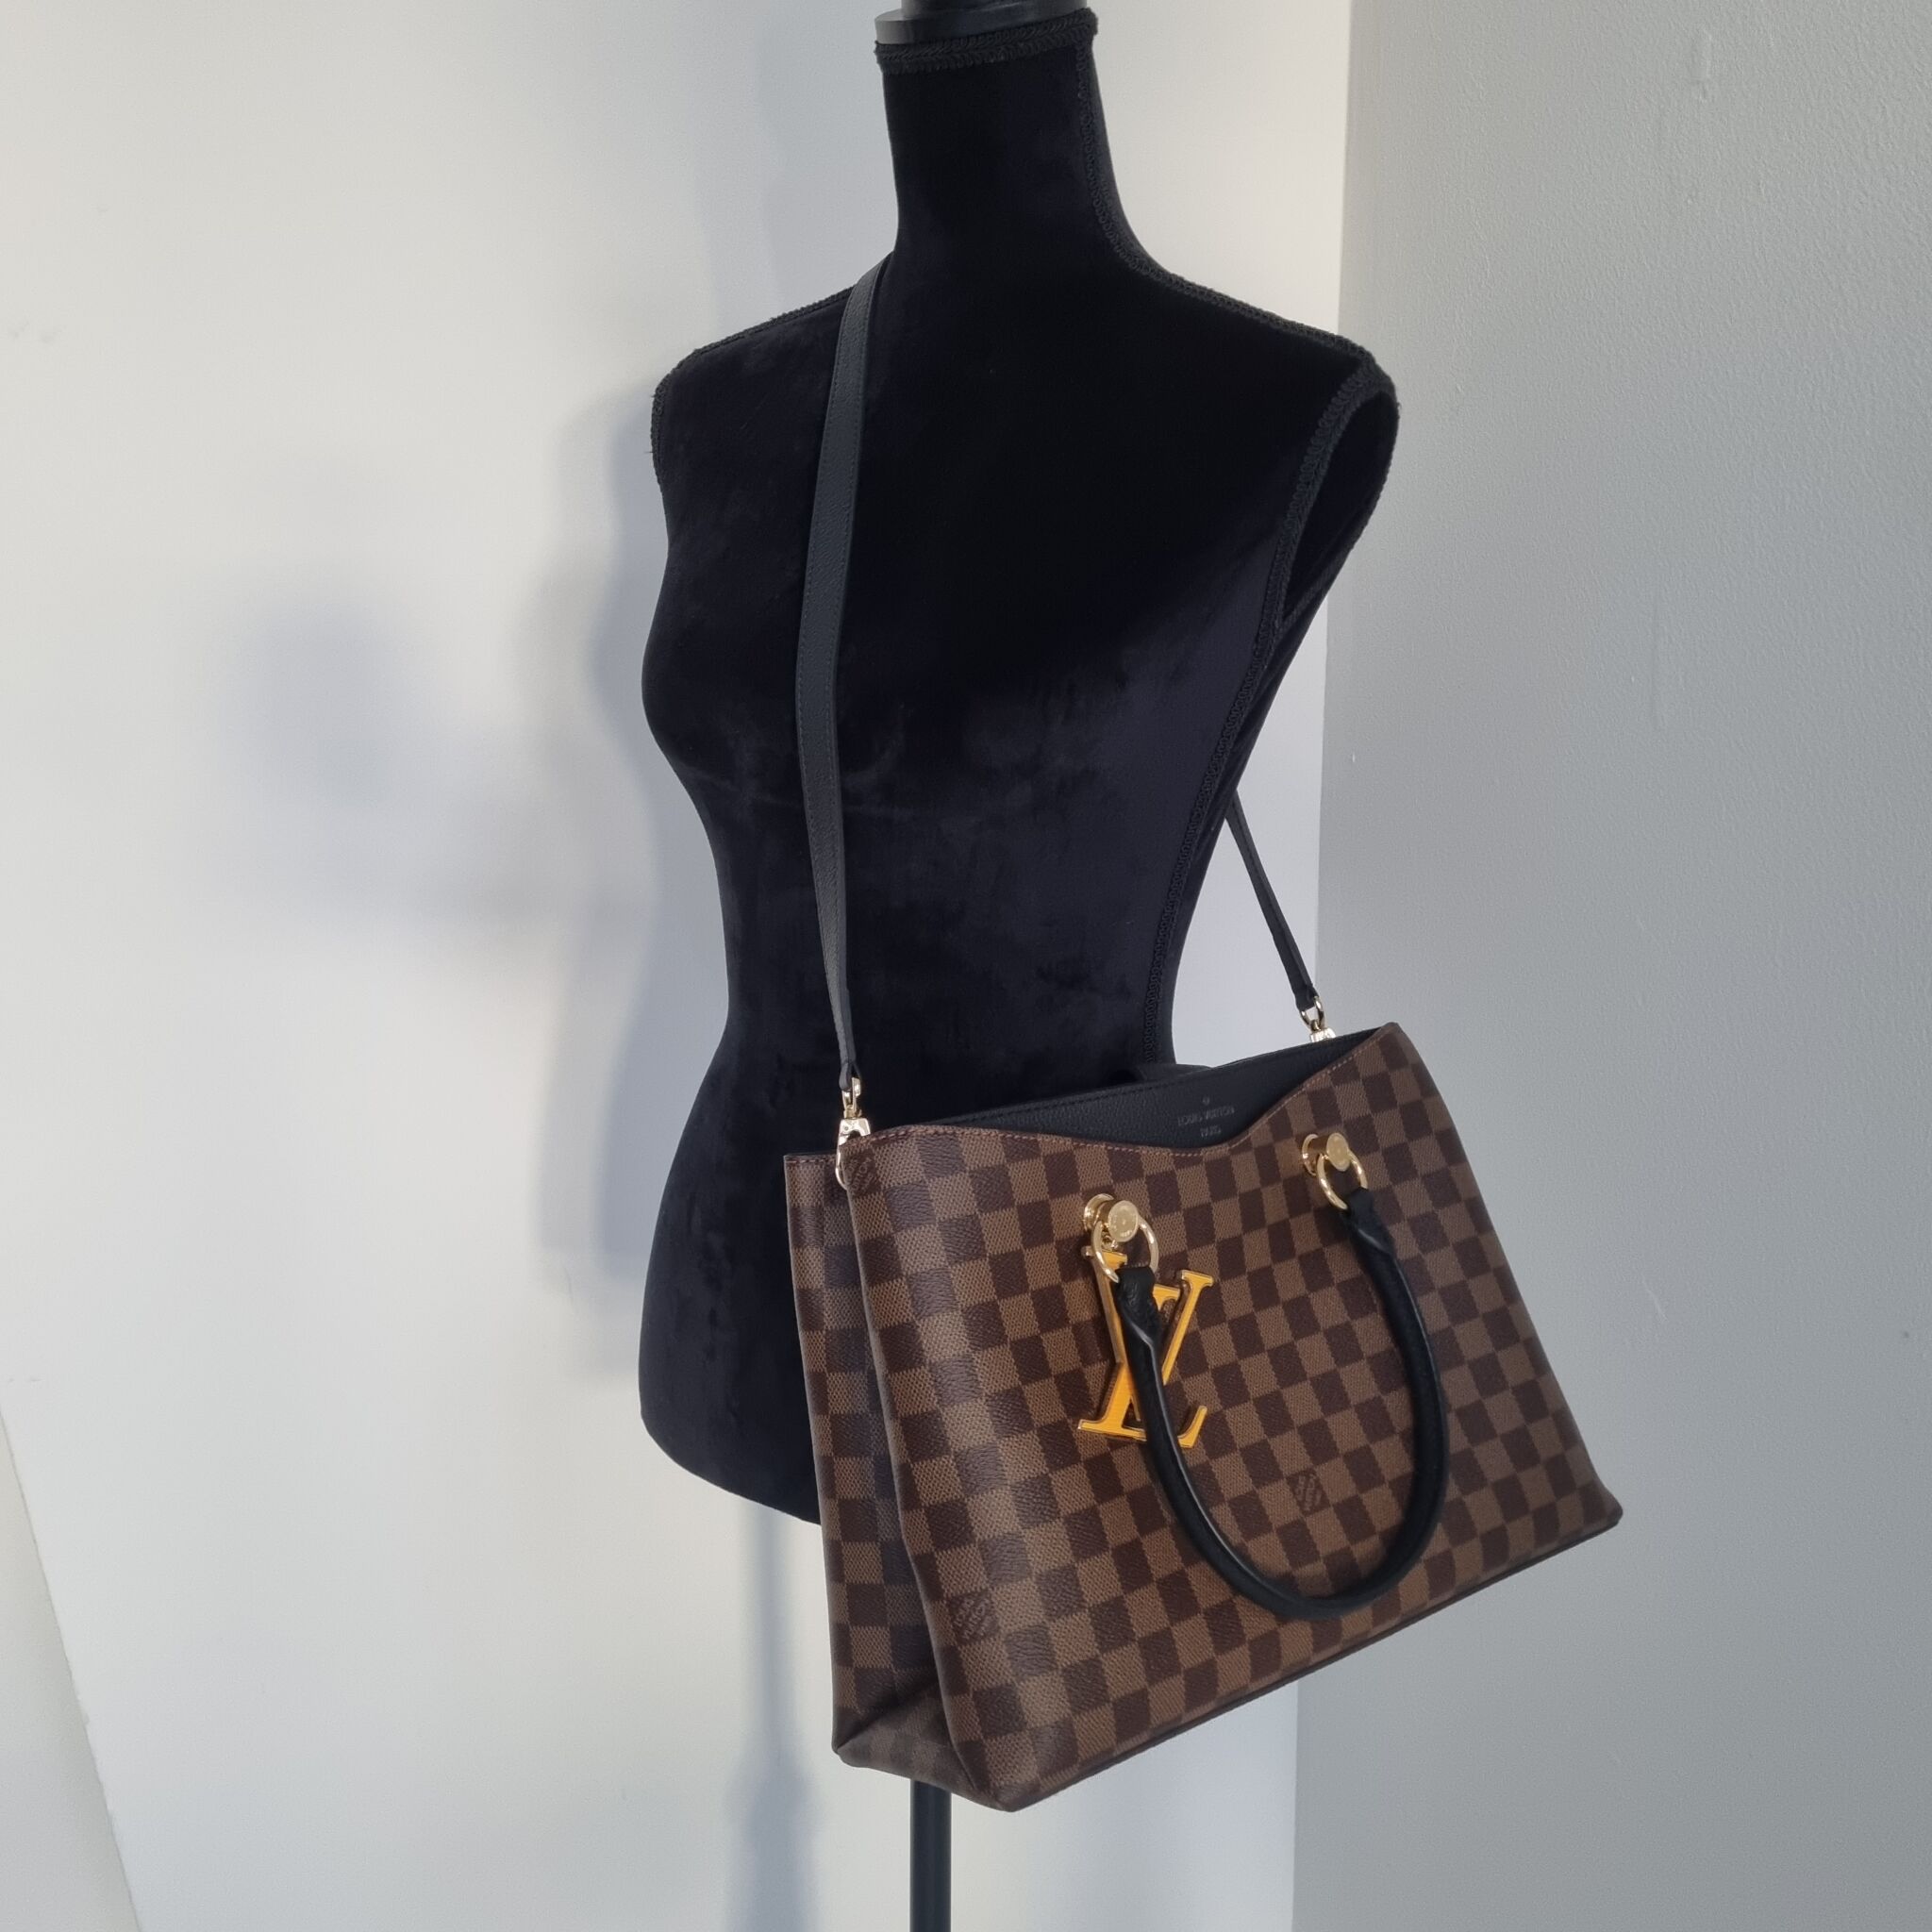 Louis Vuitton Damier Ebene Canvas LV Riverside Tote - Handbag | Pre-owned & Certified | used Second Hand | Unisex